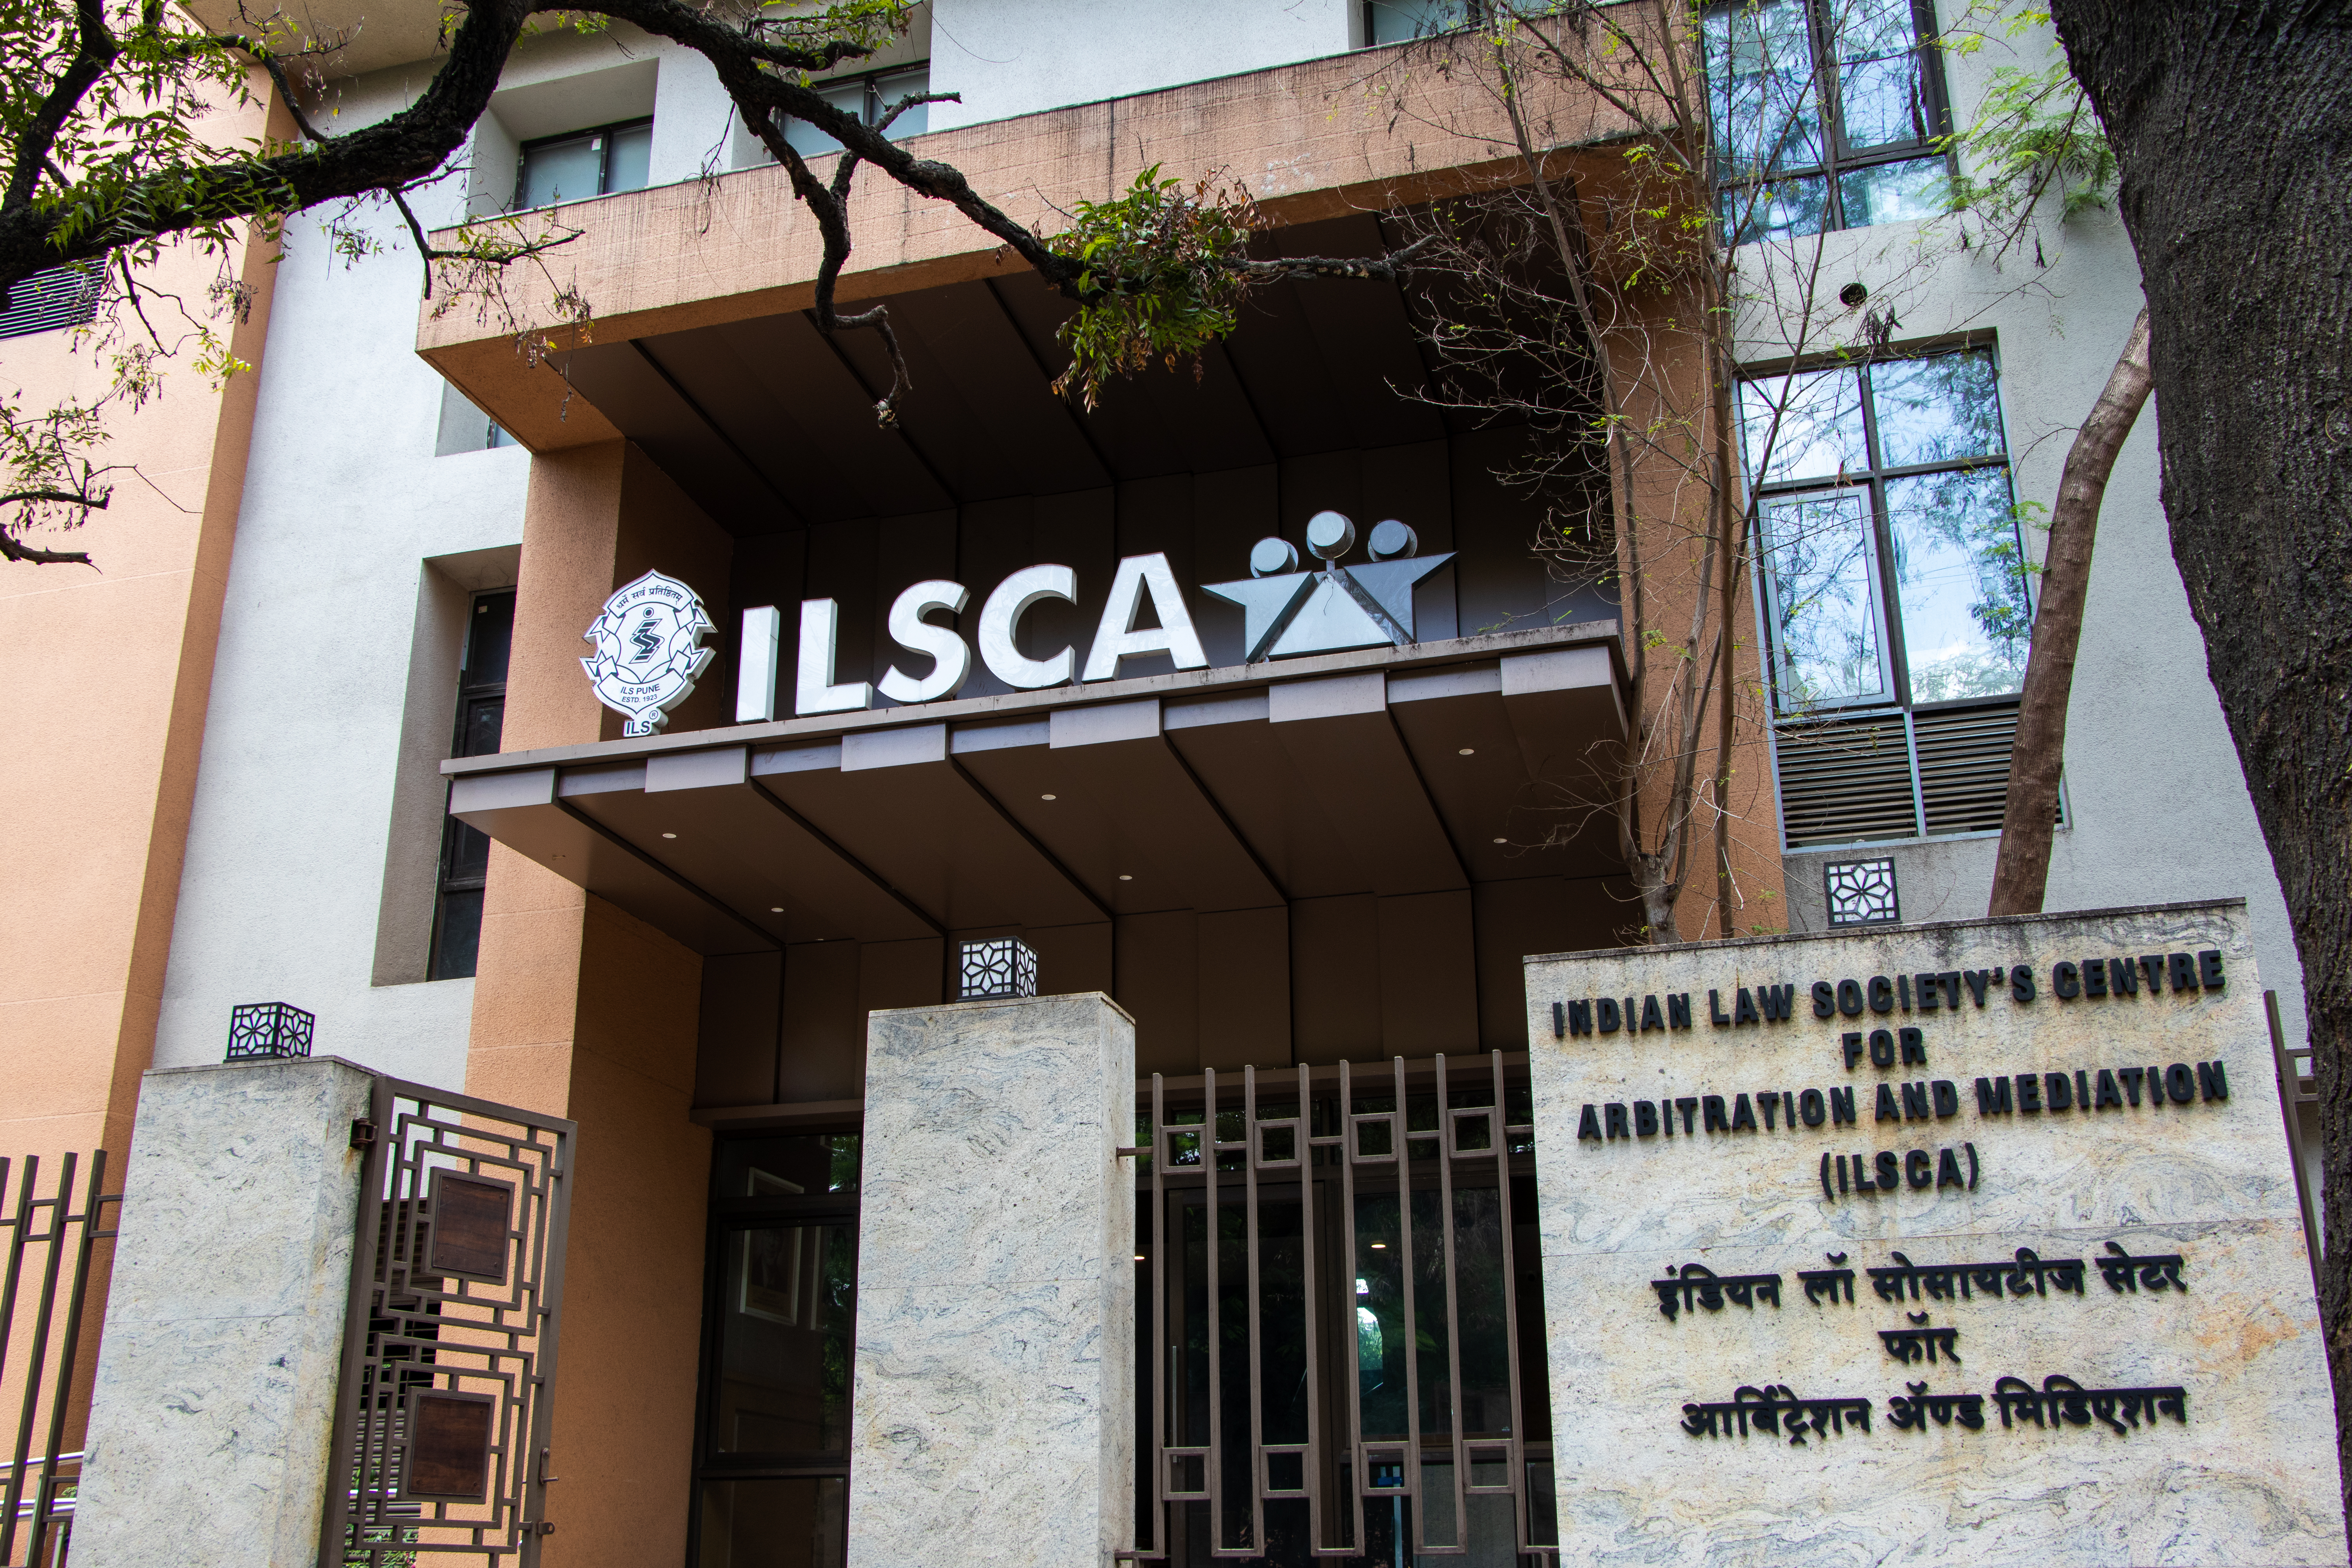 Indian Law Society’s Centre for Arbitration and Mediation (ILSCA)